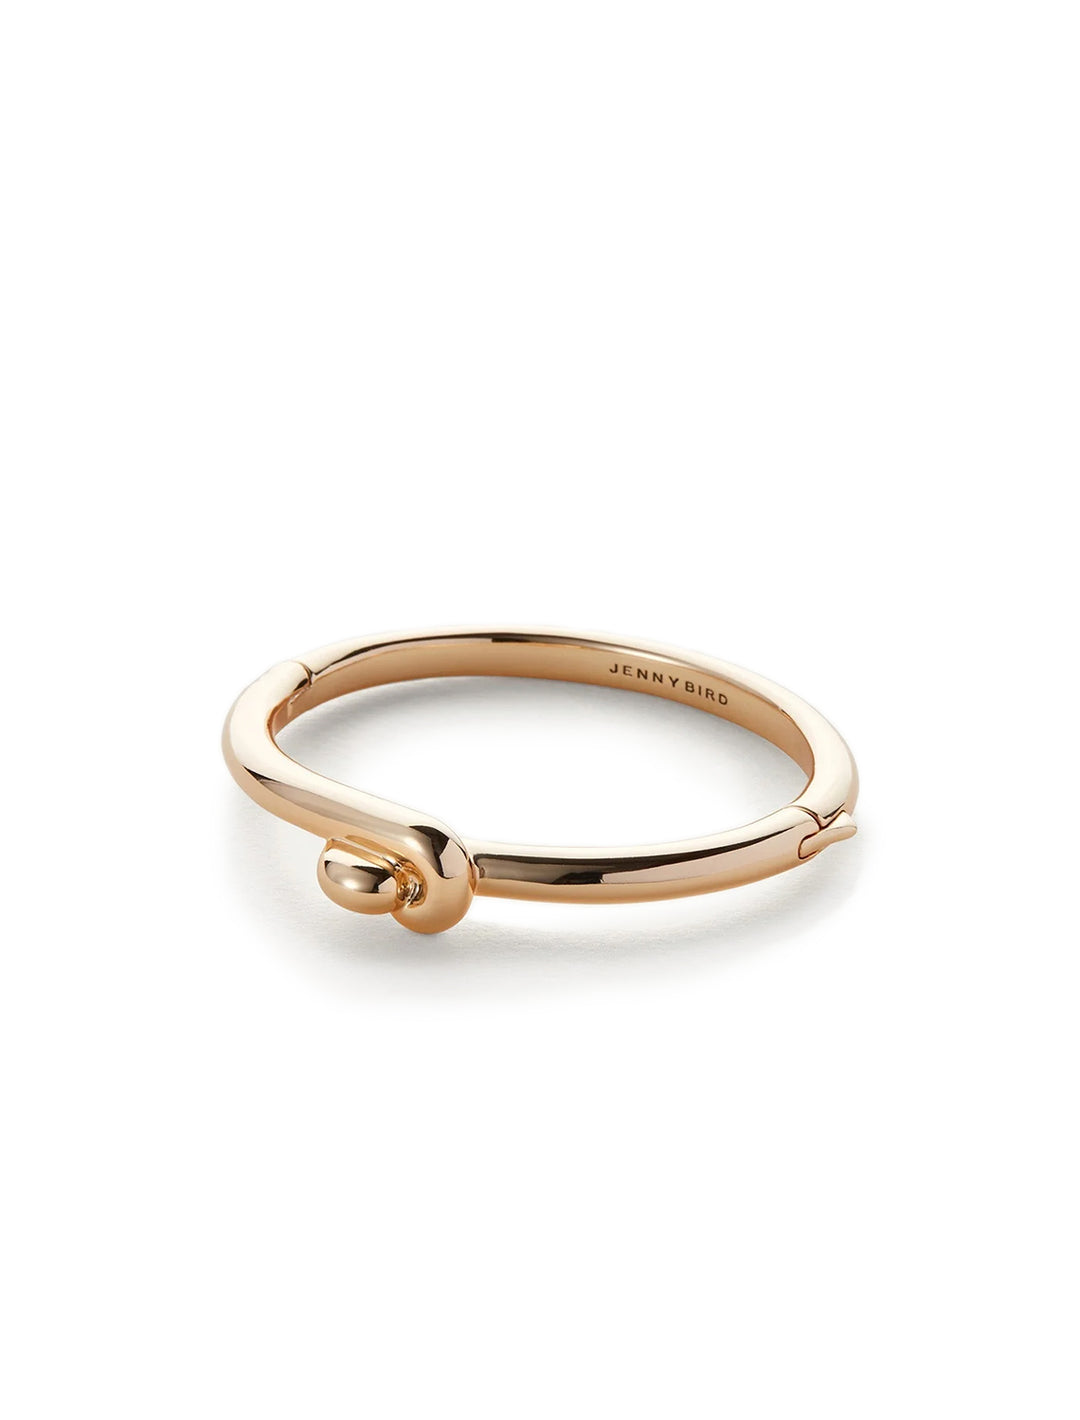 Front view of Jenny Bird's maeve bangle in gold.